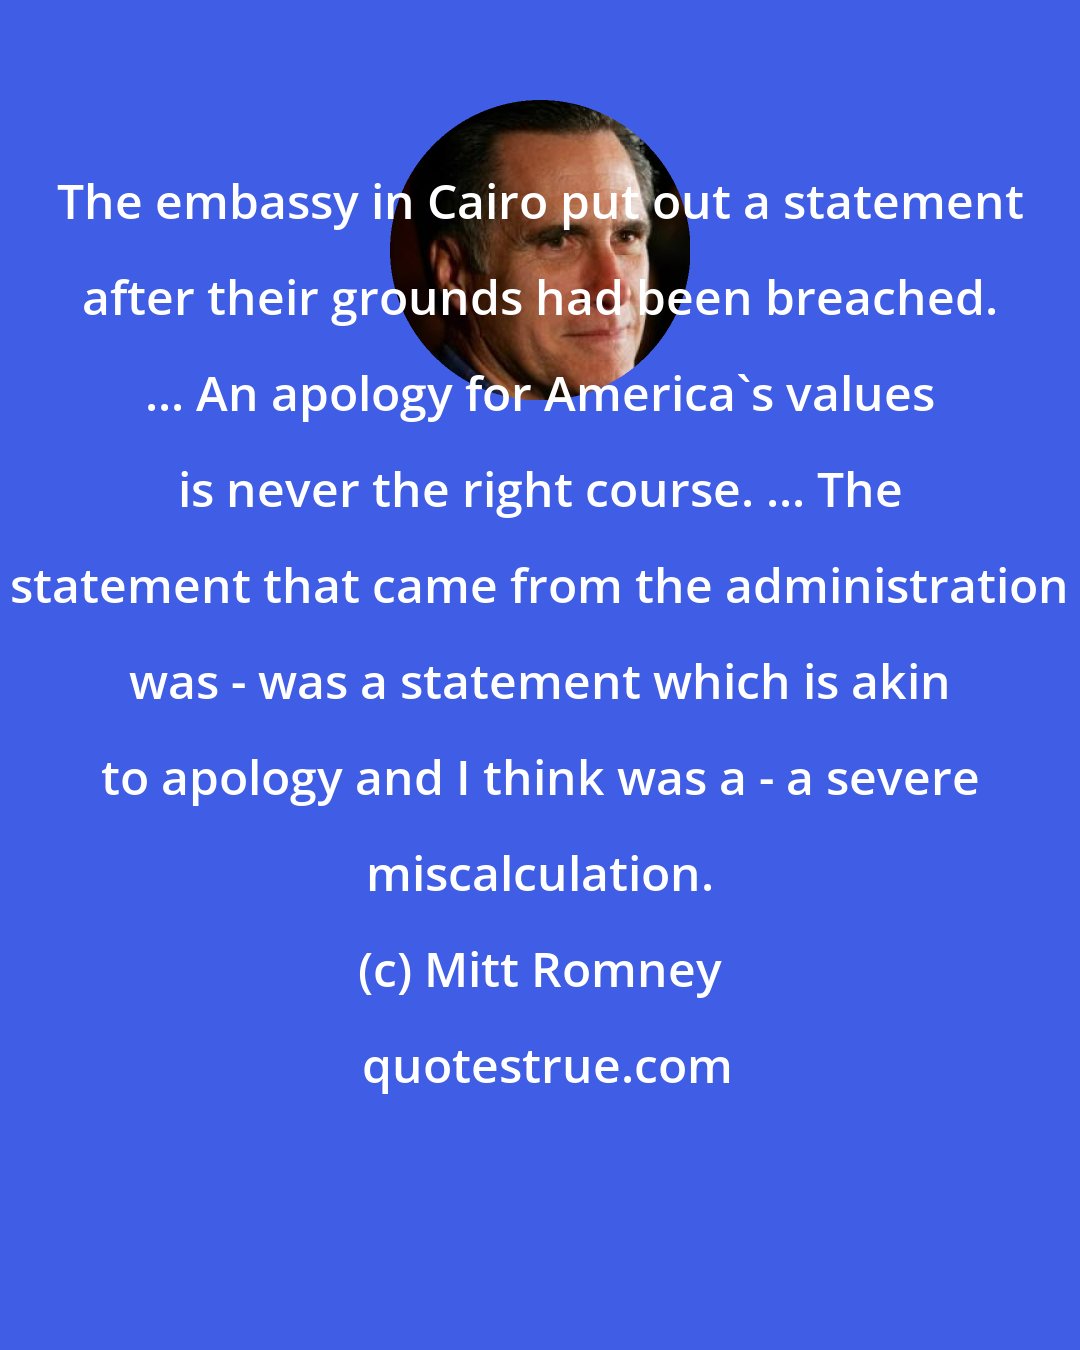 Mitt Romney: The embassy in Cairo put out a statement after their grounds had been breached. ... An apology for America's values is never the right course. ... The statement that came from the administration was - was a statement which is akin to apology and I think was a - a severe miscalculation.